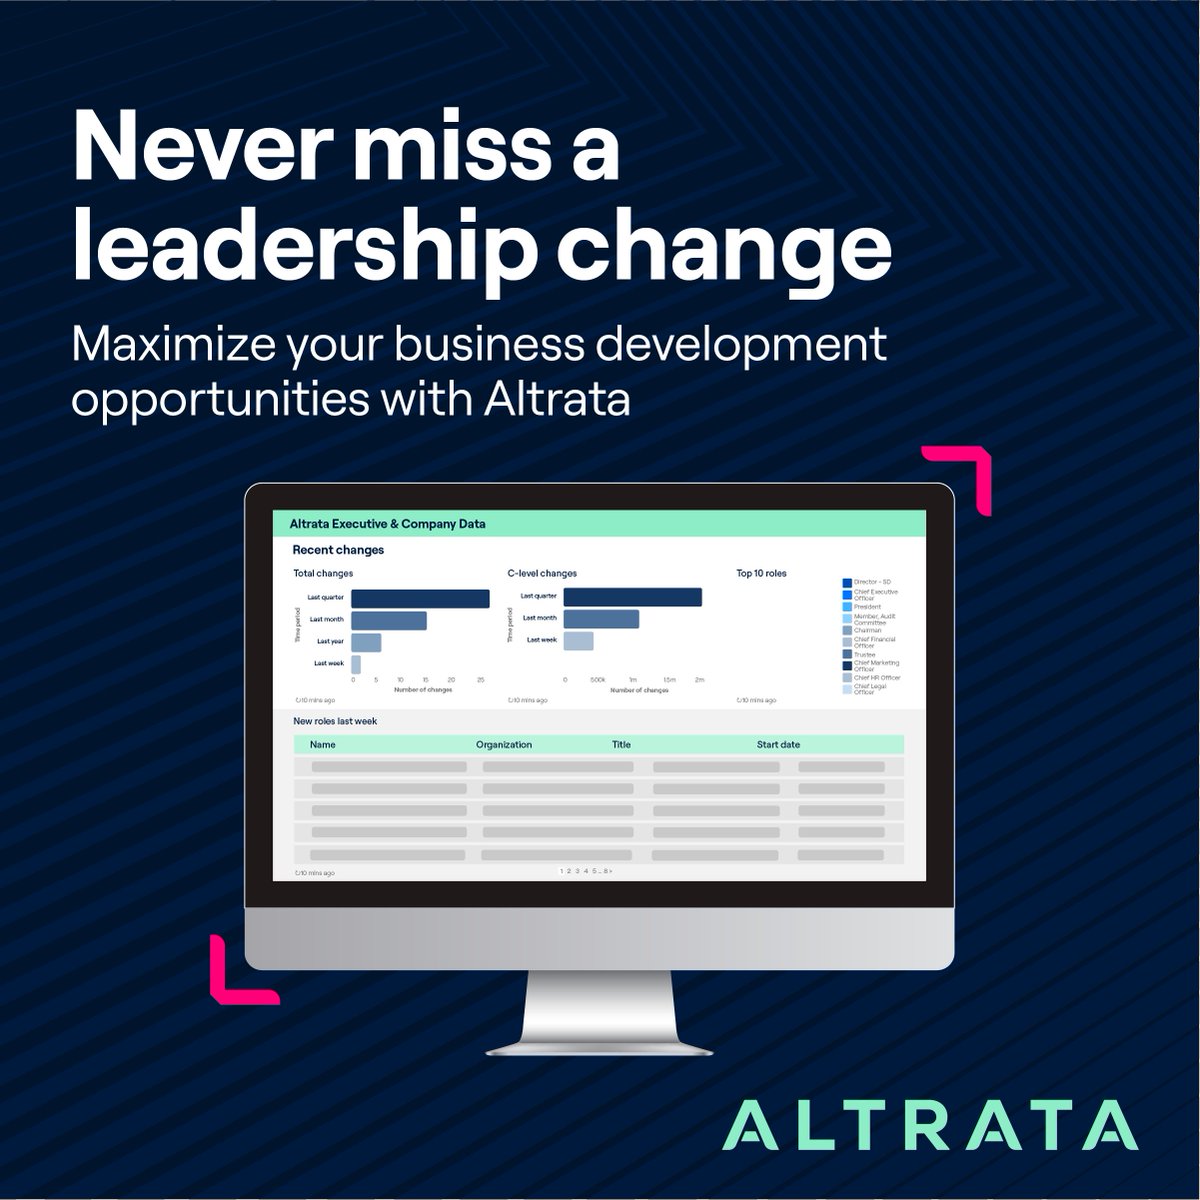 Make outdated contact intelligence a thing of the past with @AltrataOfficial's Executive & Company Data, our newest data feed - bit.ly/3VXmO75